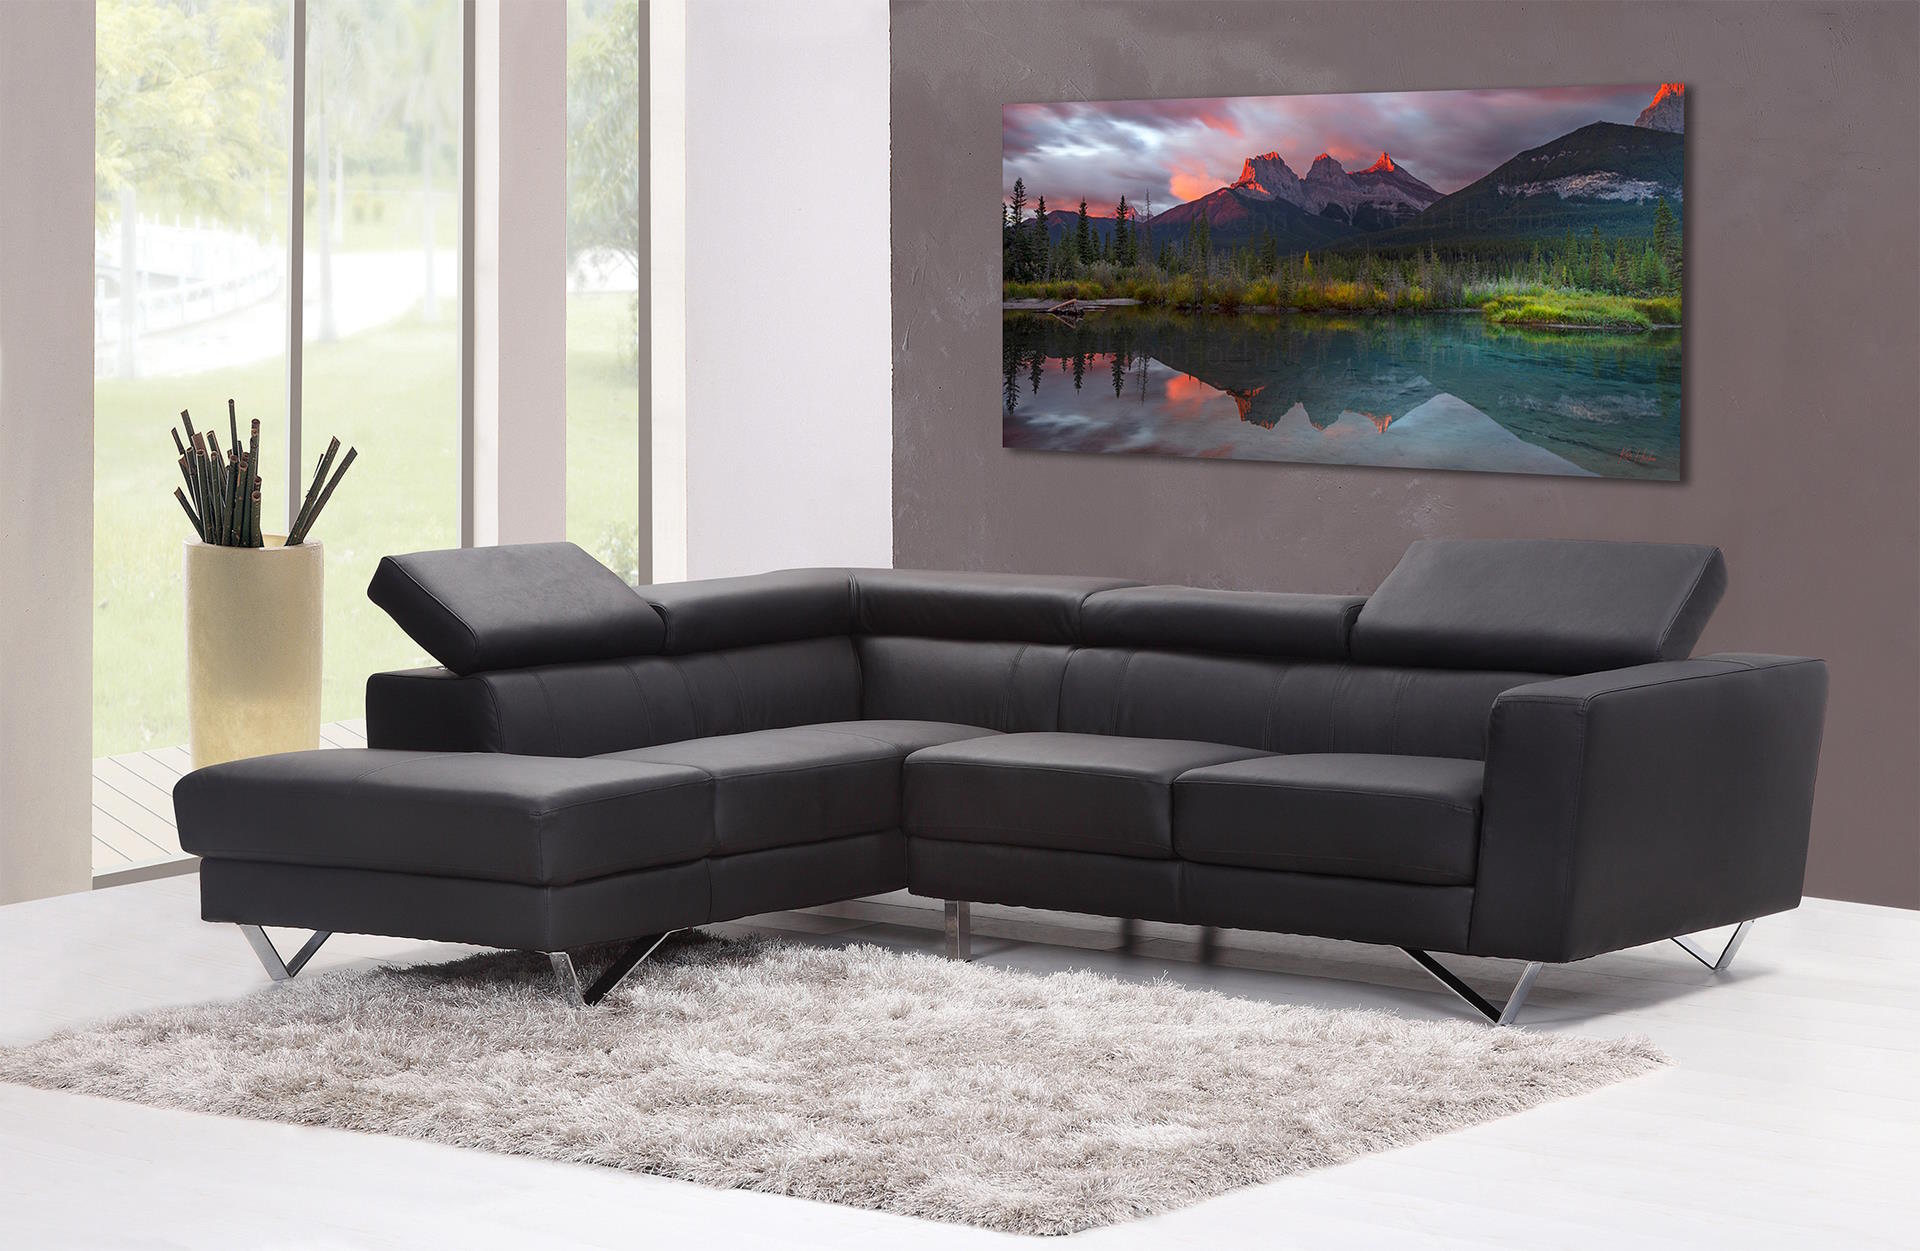 Dark wall, modern couch, fuzzy carpet with artwork wall hanging showing mountain, lake landscape